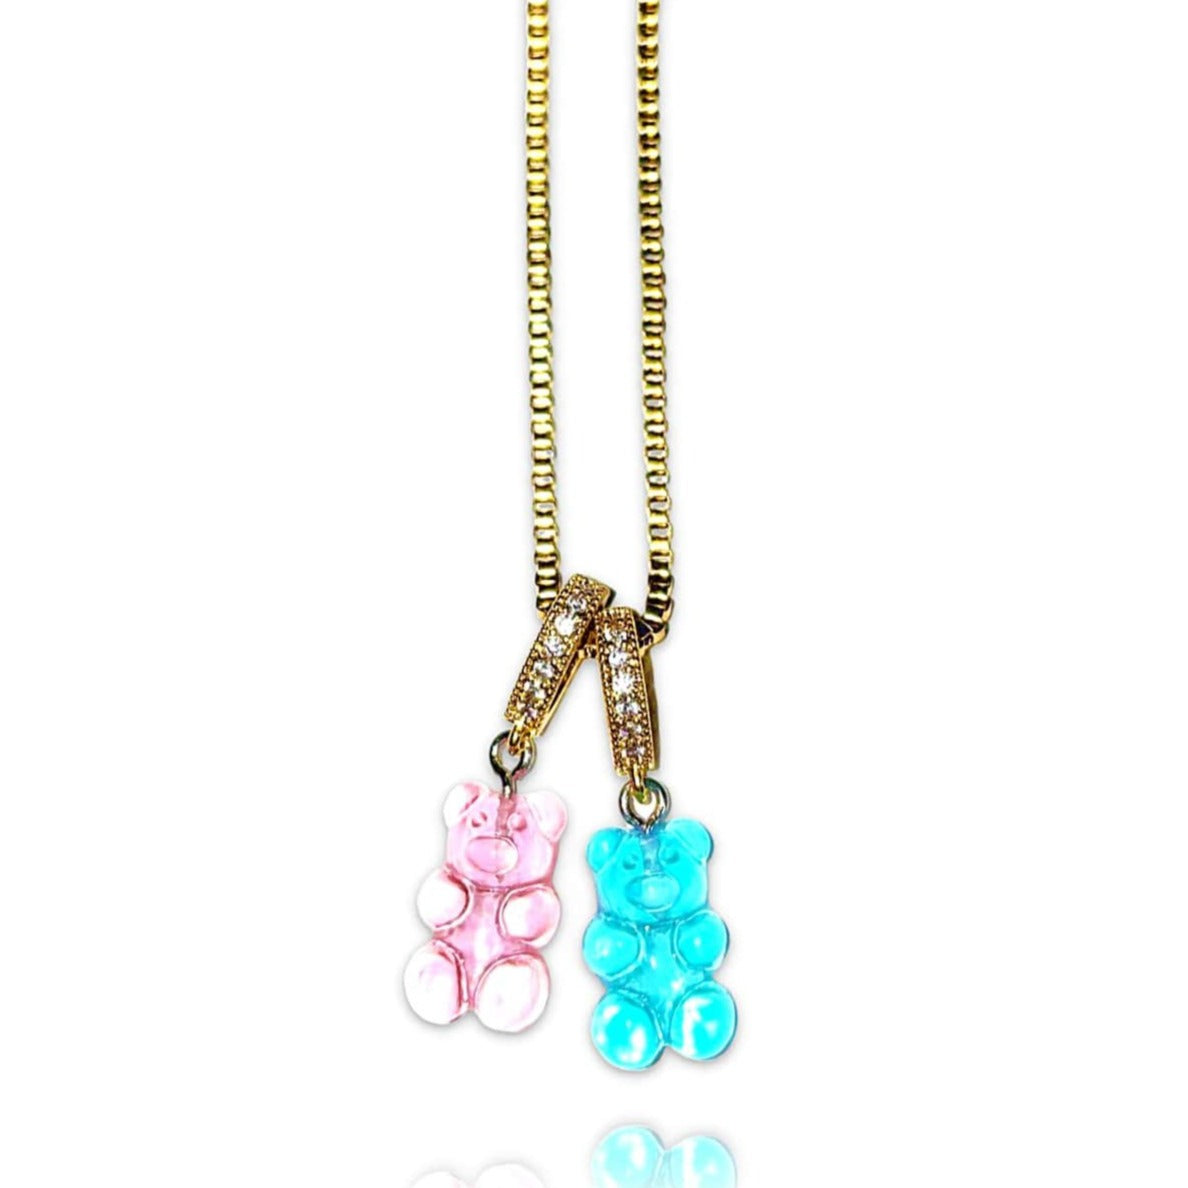 Cotton Candy Gummy Bear Necklace - 18 Inch Gold Chain With A Blue & Pink Bear Pendant - Gummy Bear Bling